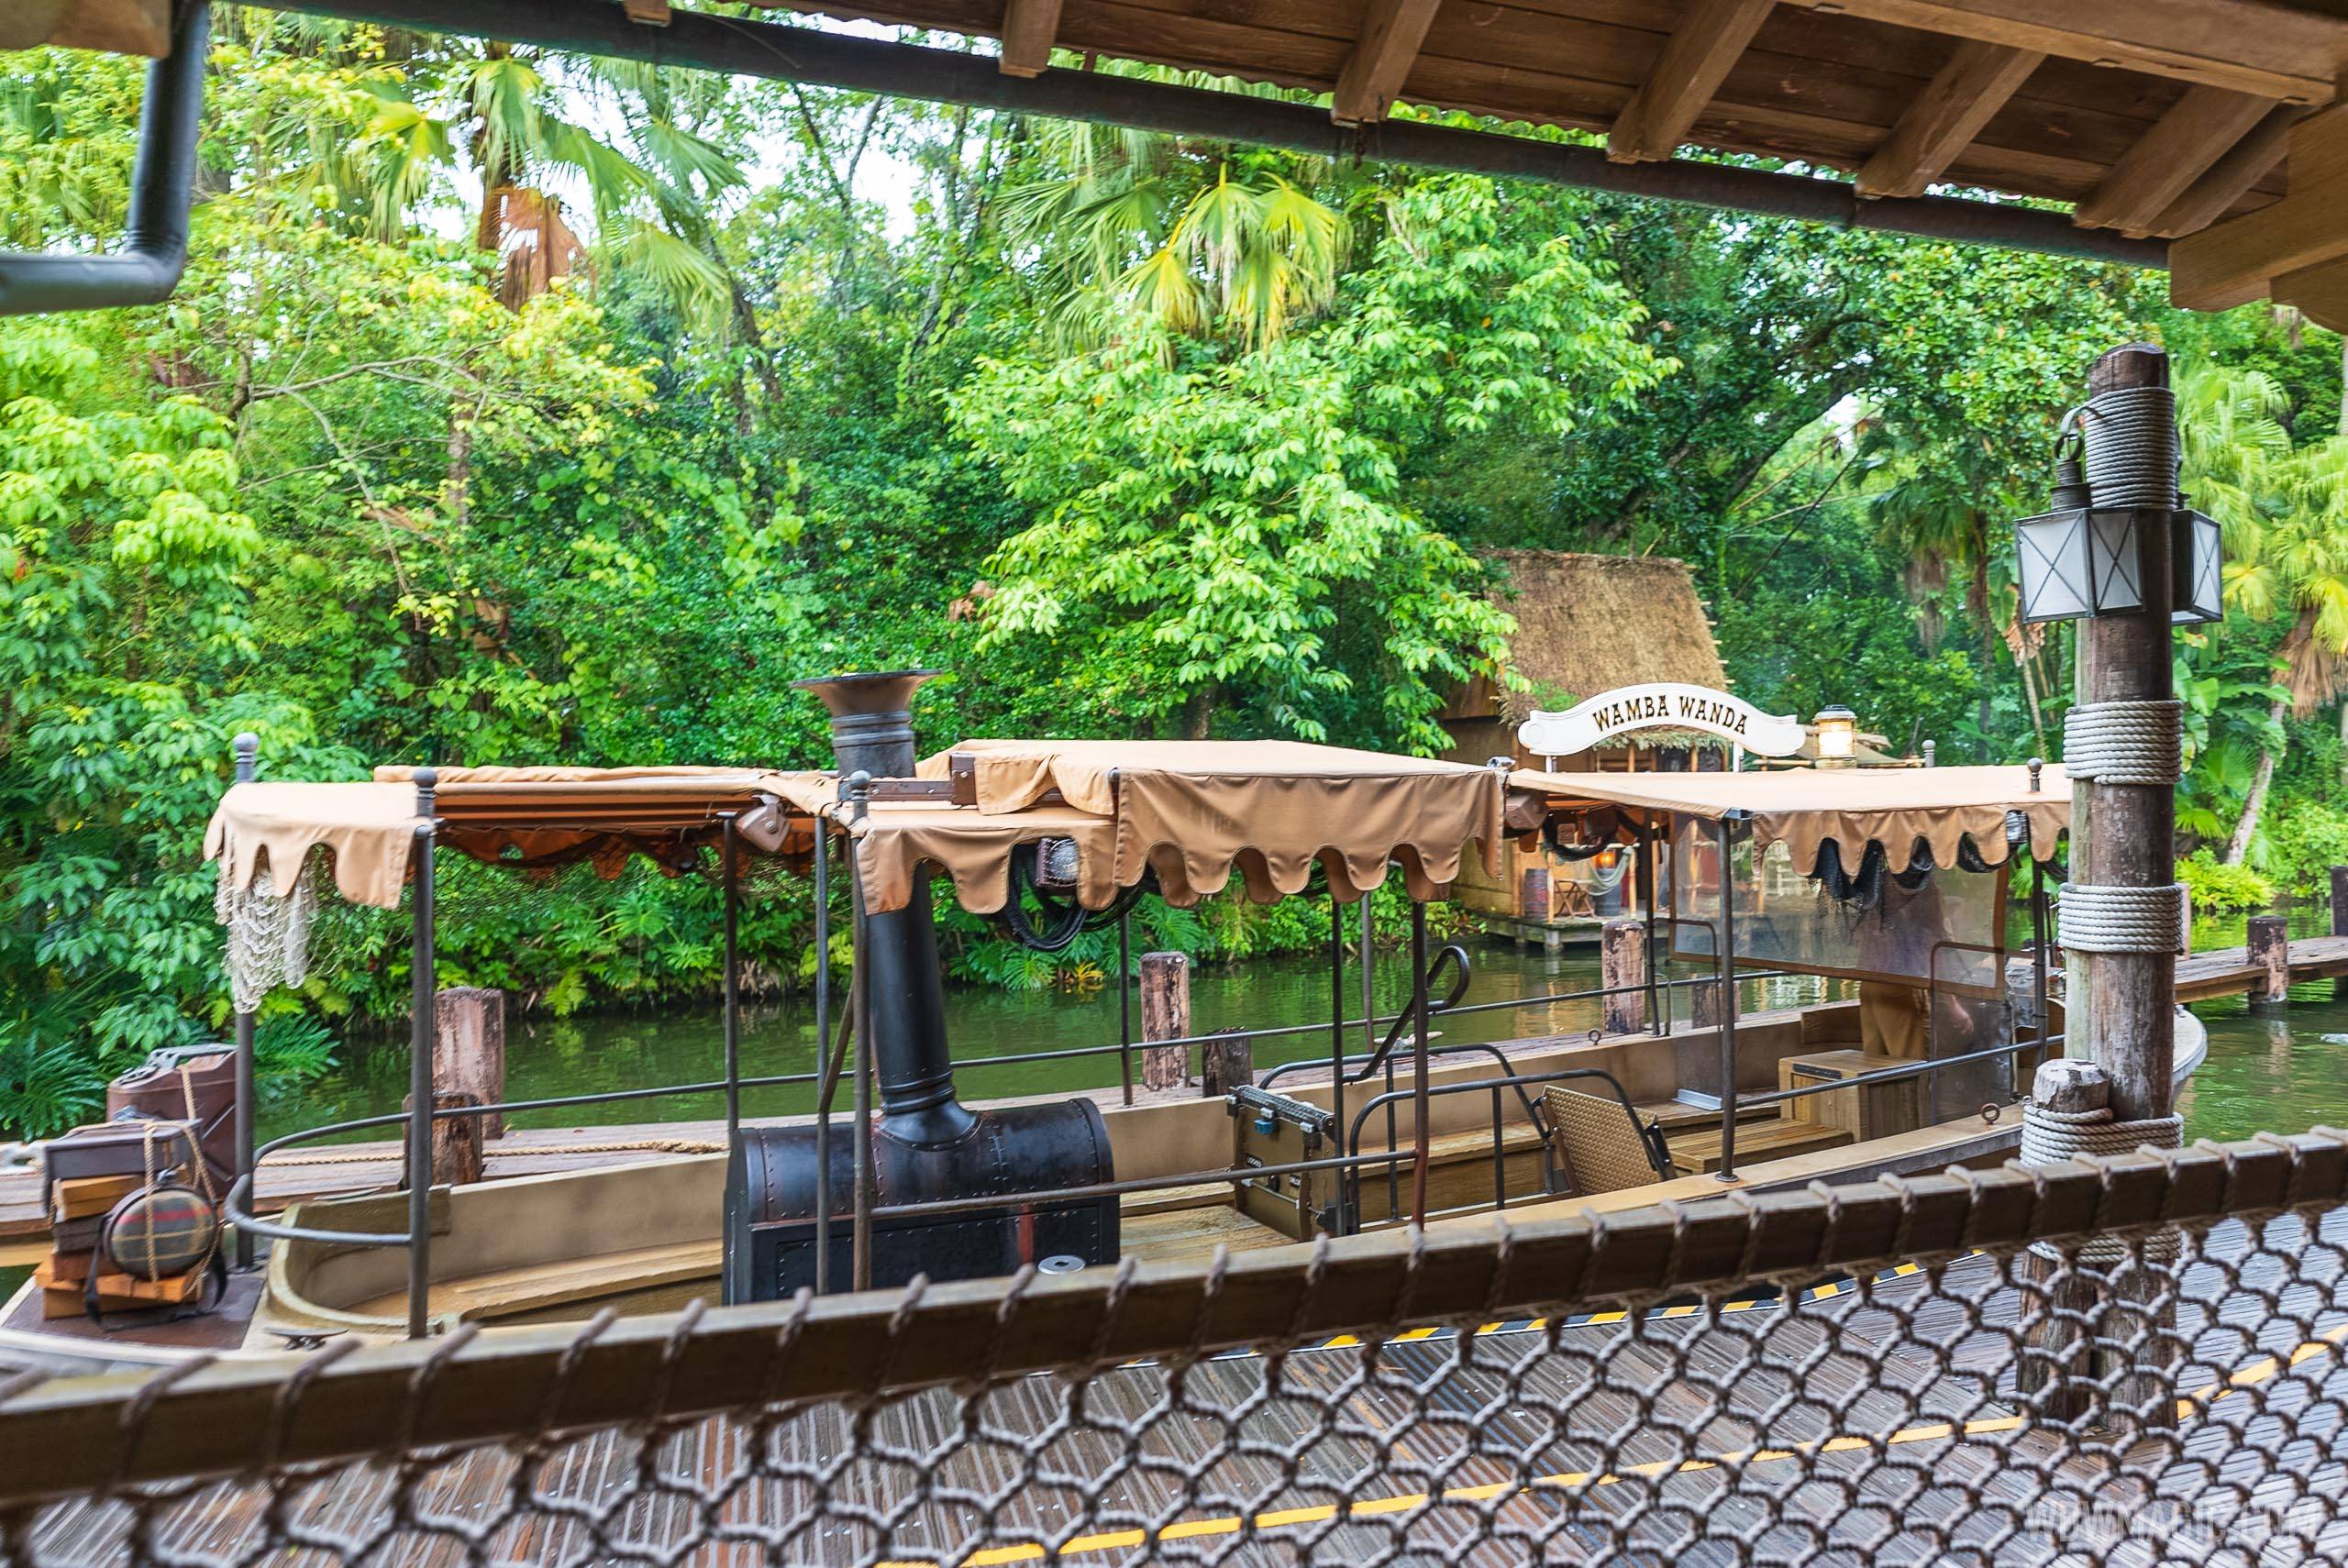 Plexiglass dividers are removed from the guest seating on the Jungle Cruise